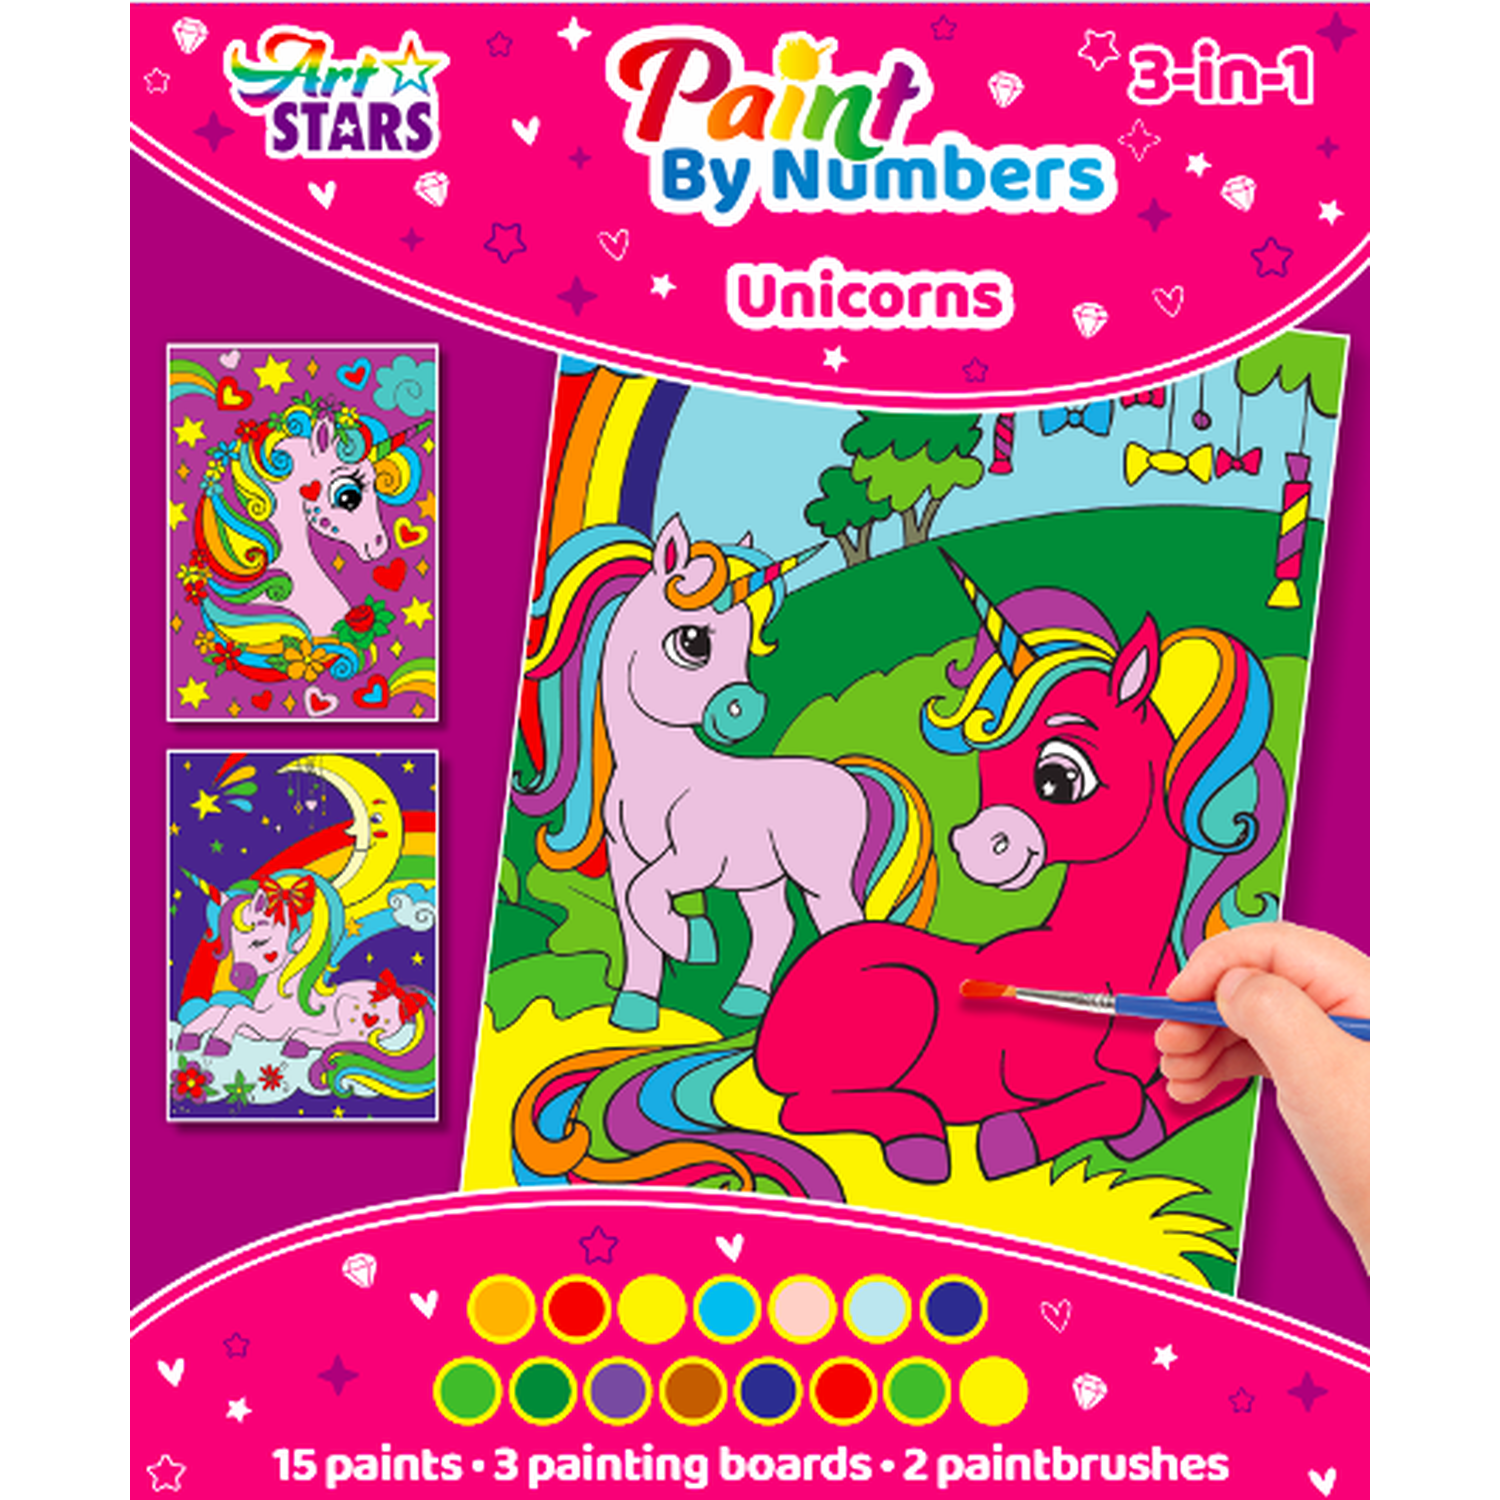 Kids 3 in 1 Paint by Numbers - Unicorns Image